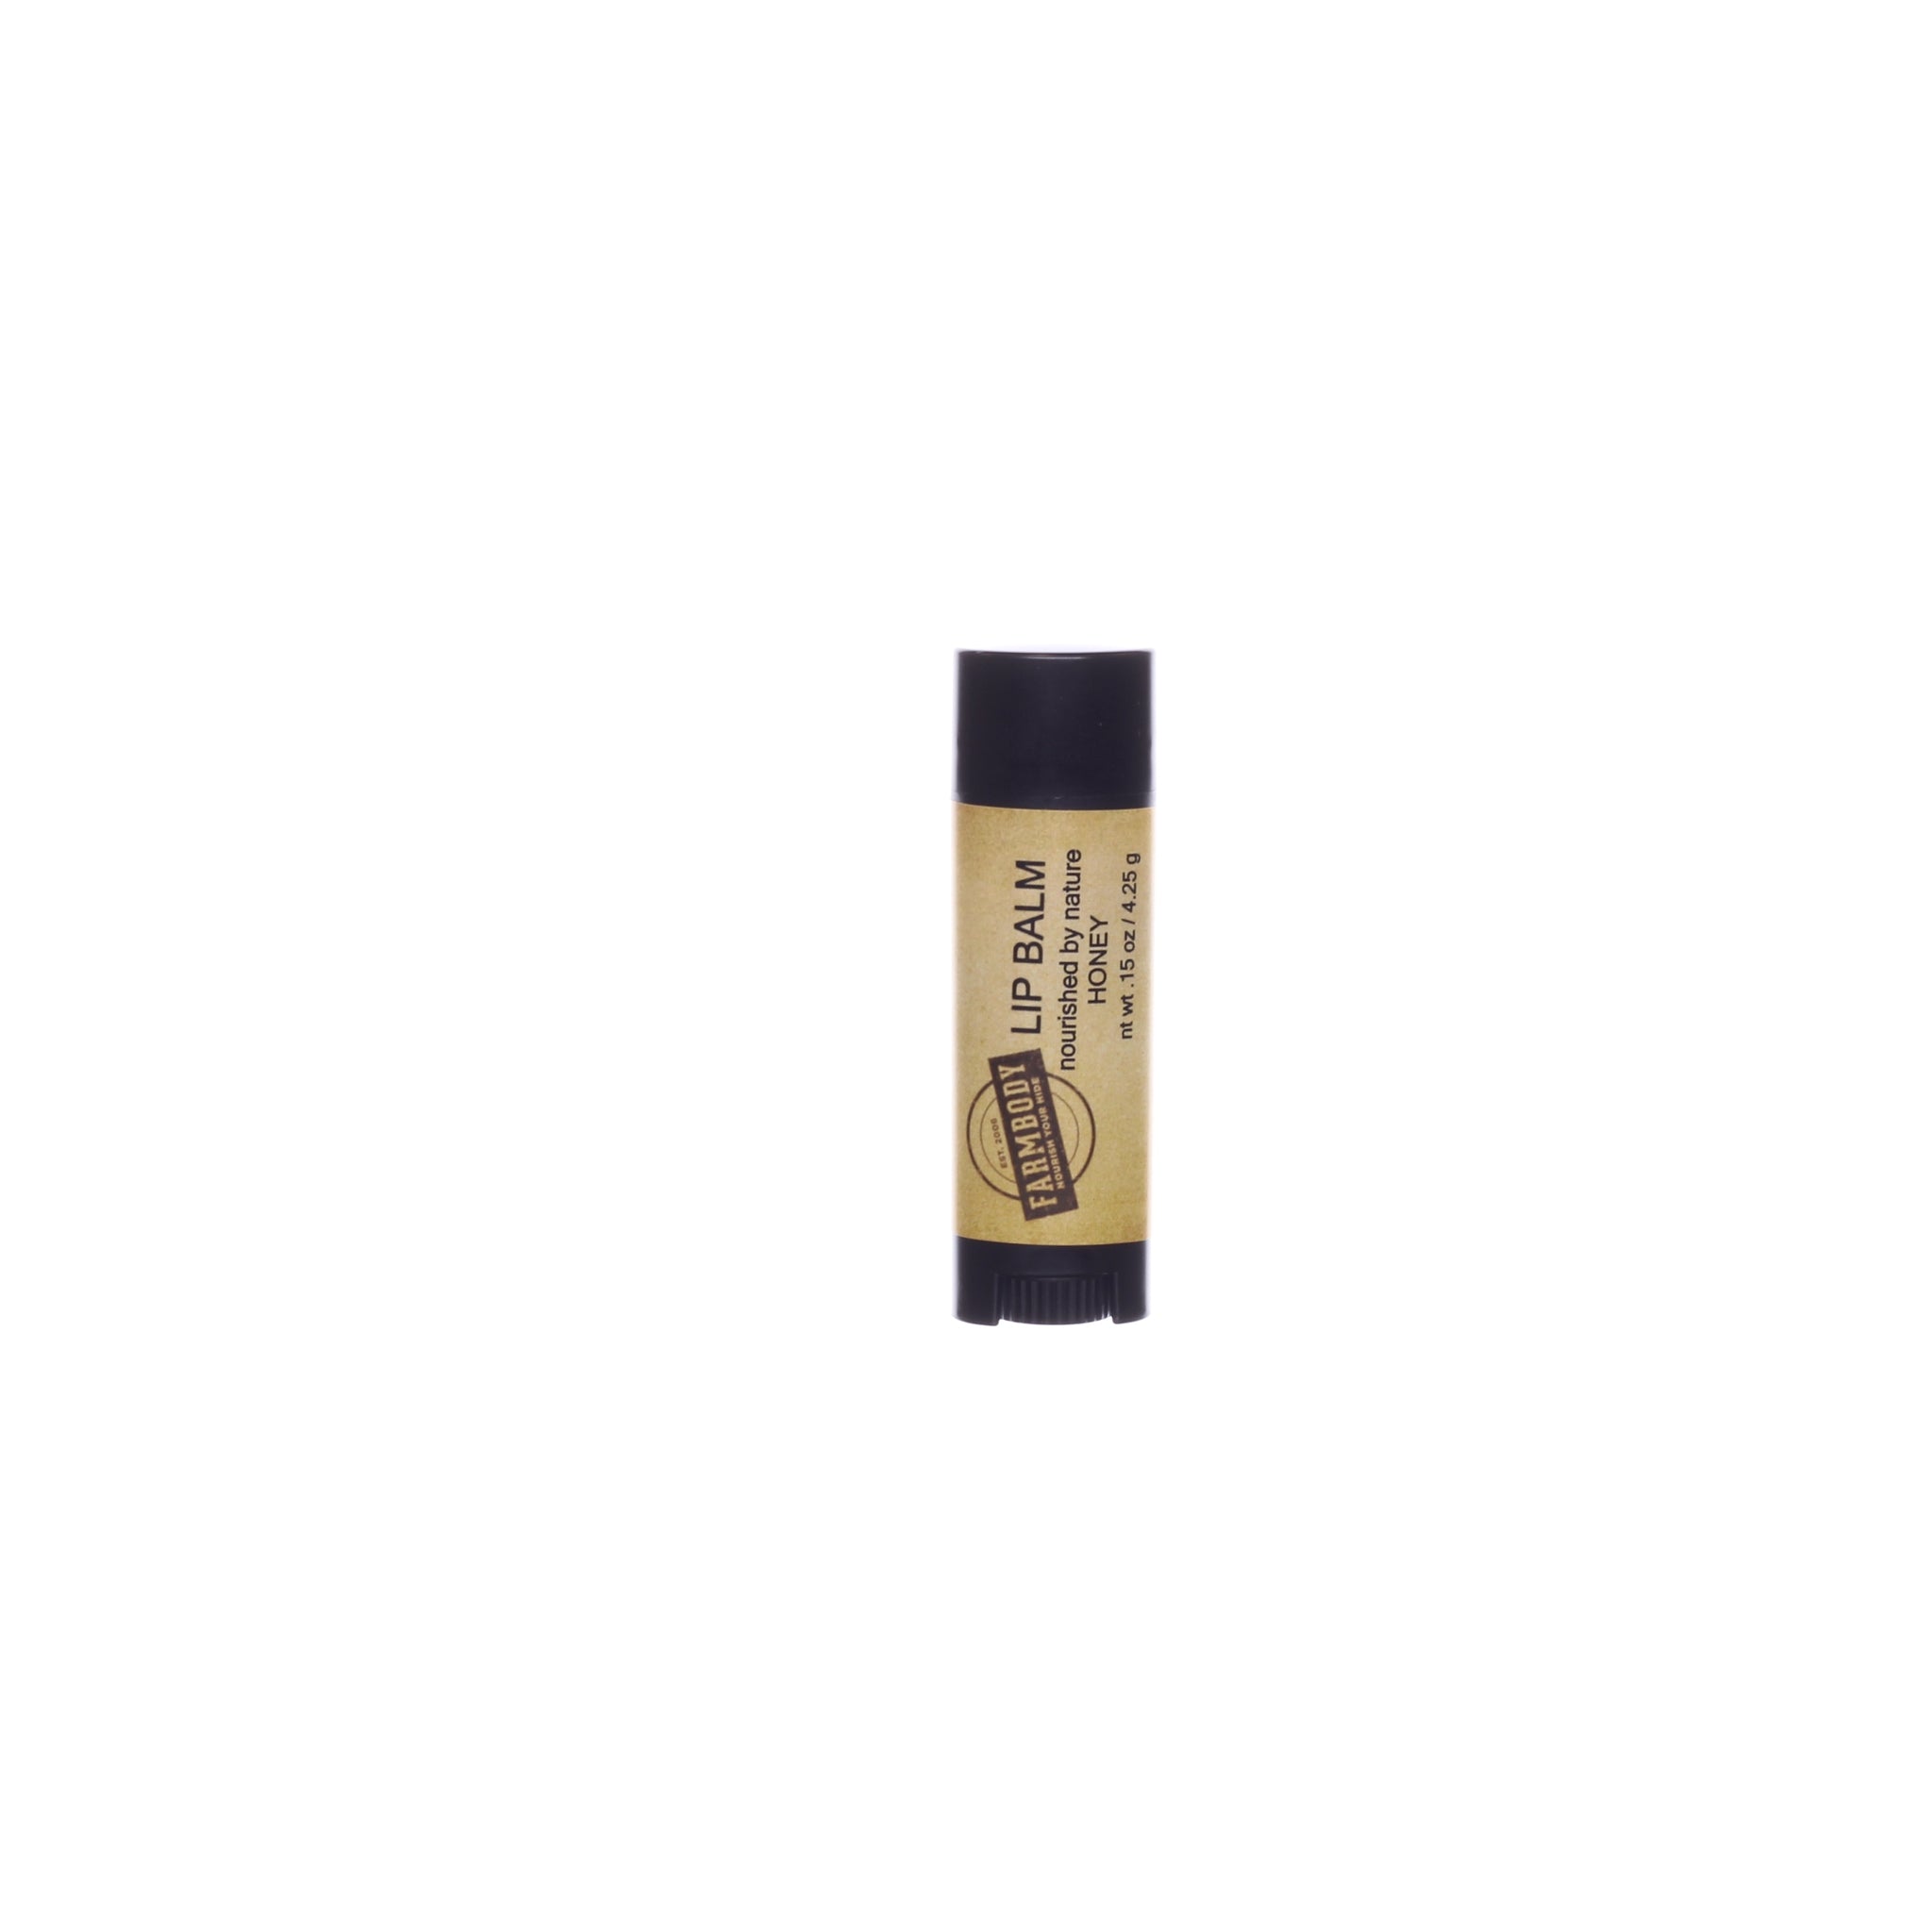 Lip Balm, nourished by nature